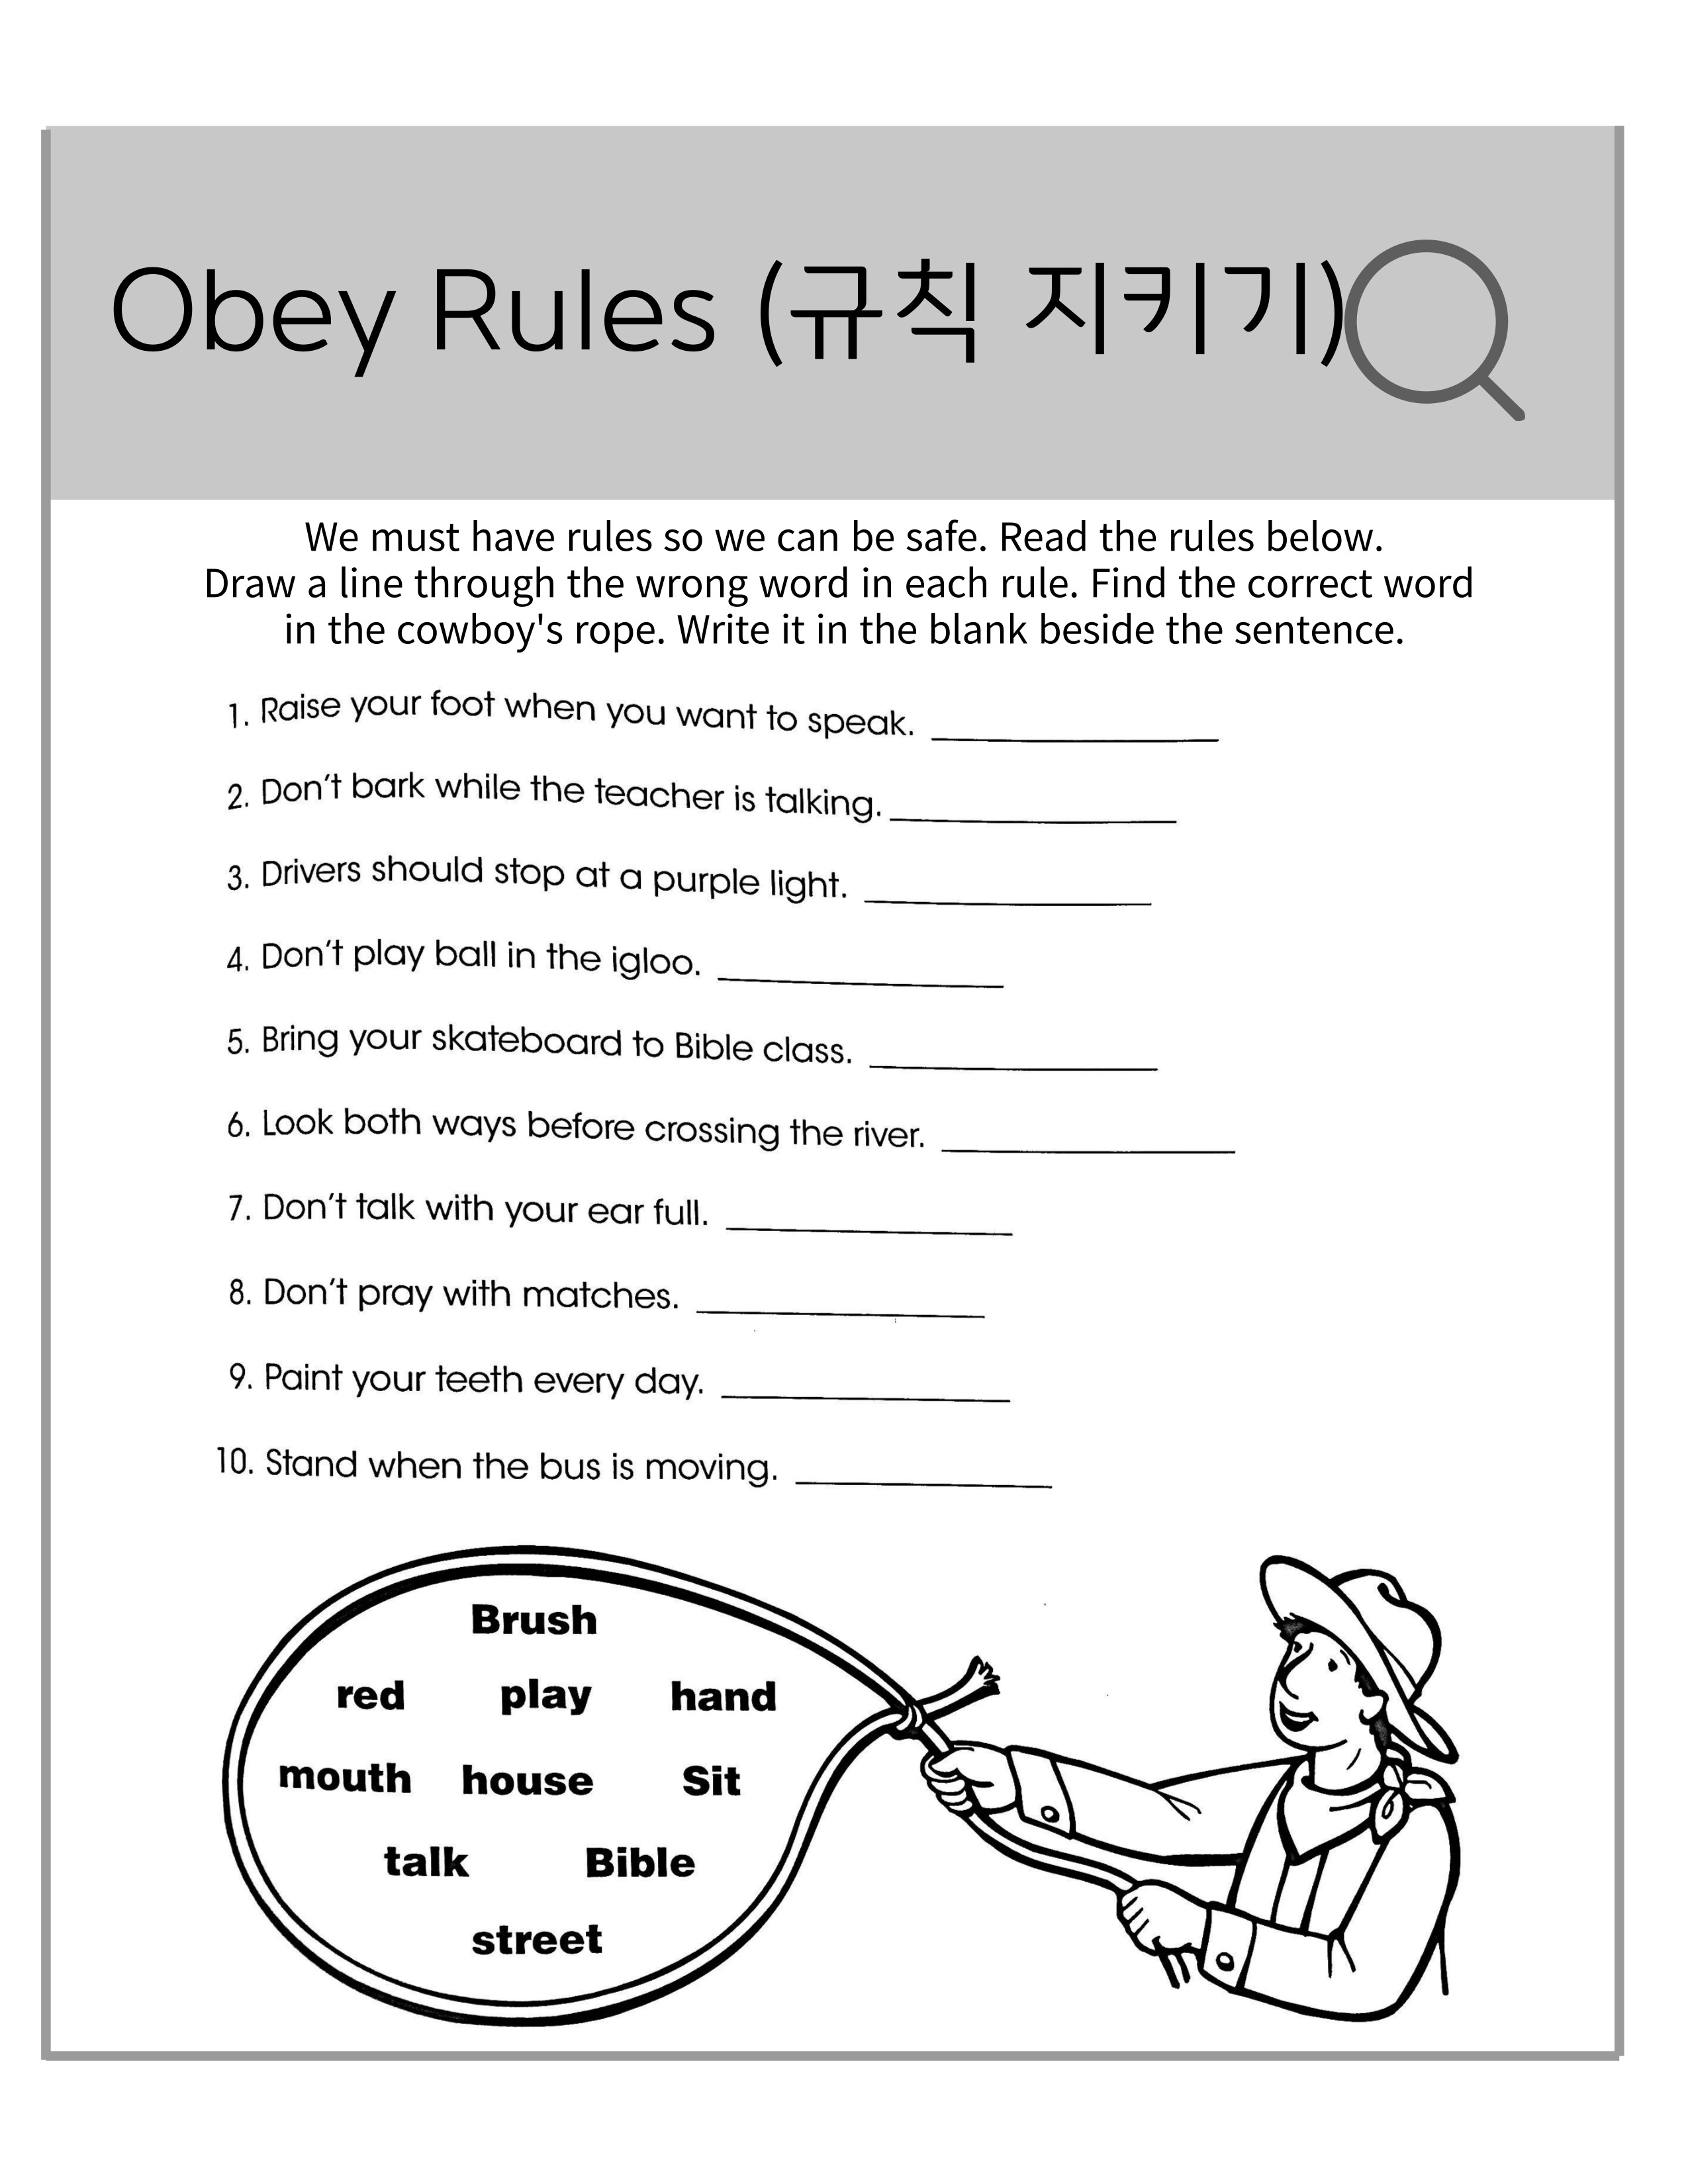 4. Showing Obeying Rules.jpg